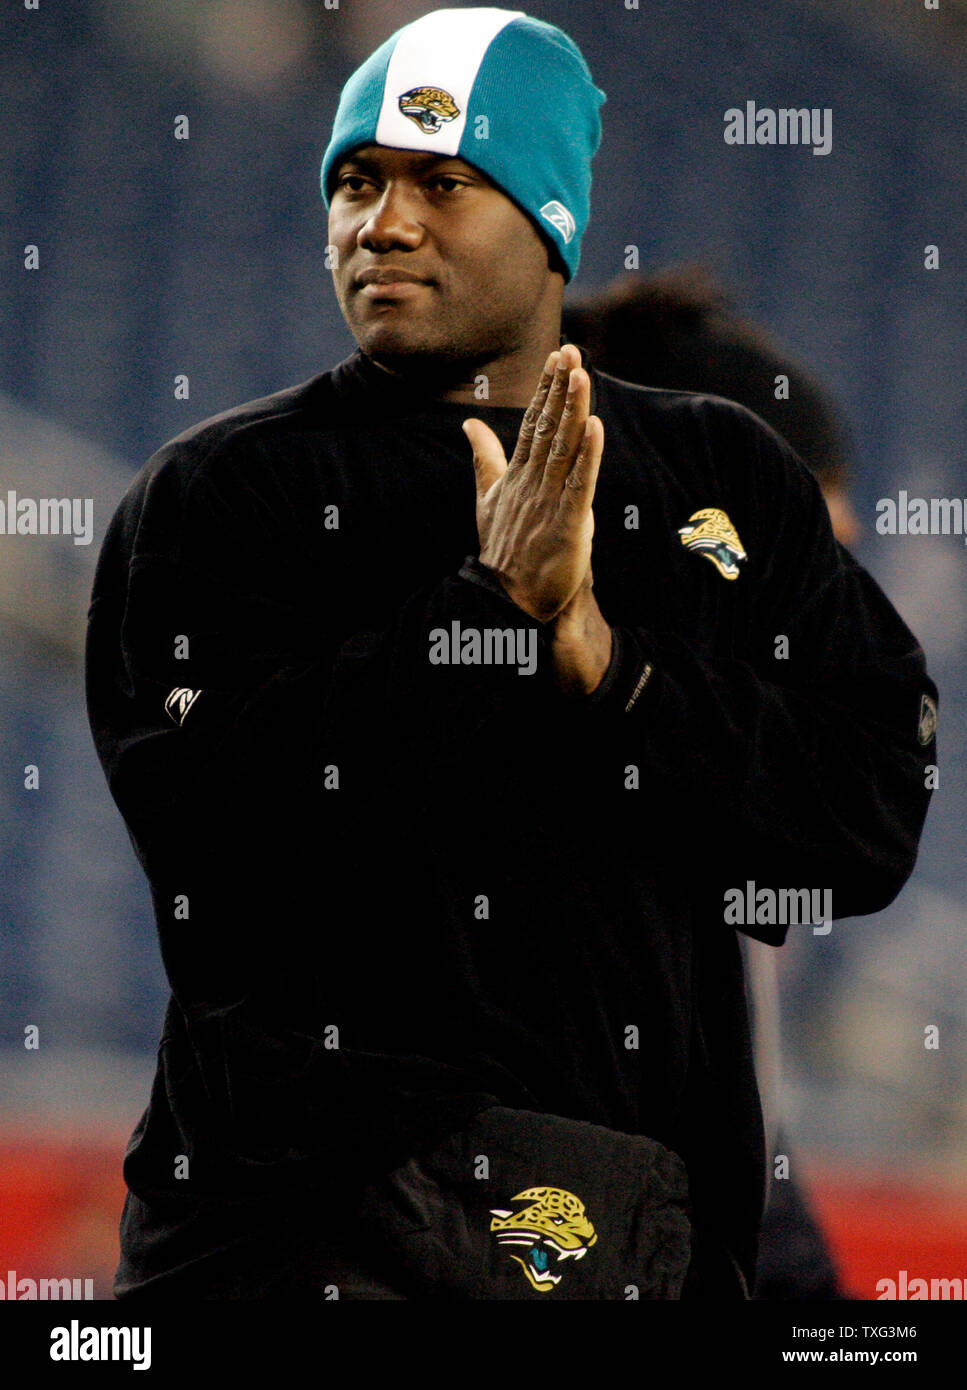 Jacksonville Jaguars quarterback David Garrard warms up his hands while practicing with teammates before the AFC Divisional Playoff game against the New Engalnd Patriots at Gillette Stadium in Foxboro, Massachusetts on January 12, 2008.   (UPI Photo/Matthew Healey) Stock Photo